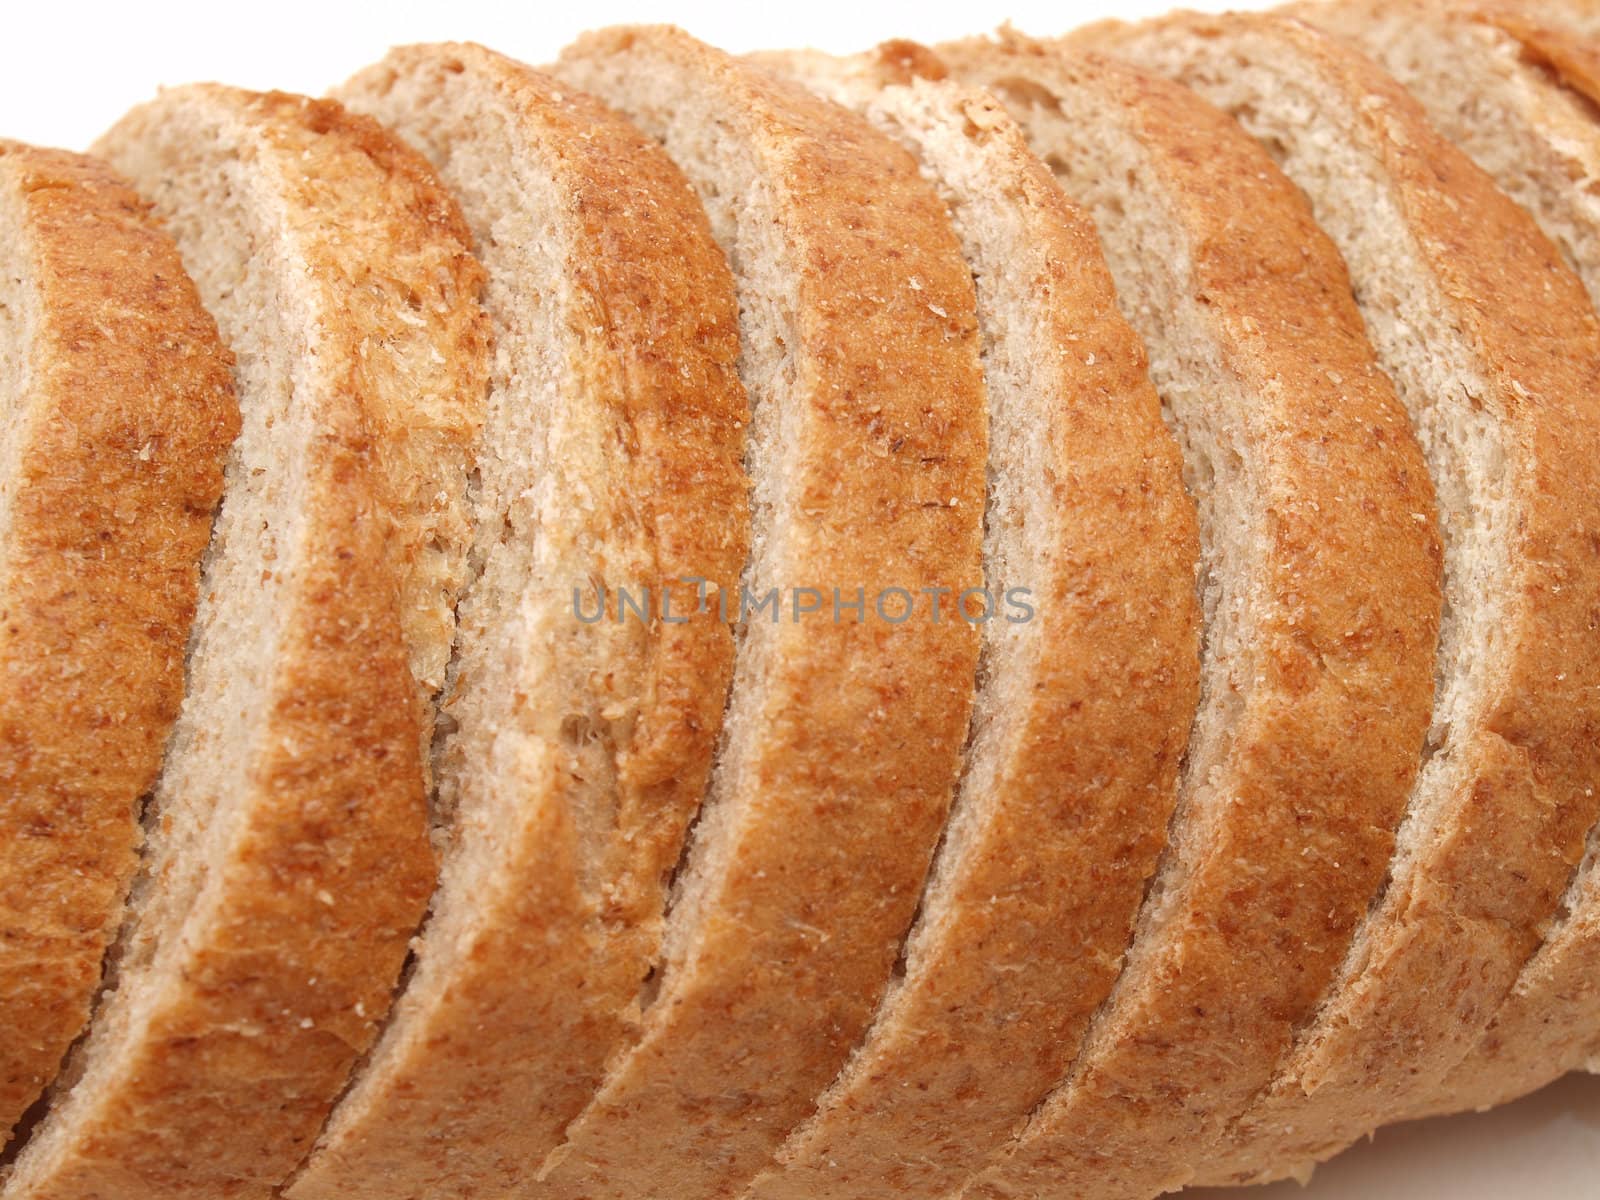 Bread on a white background        